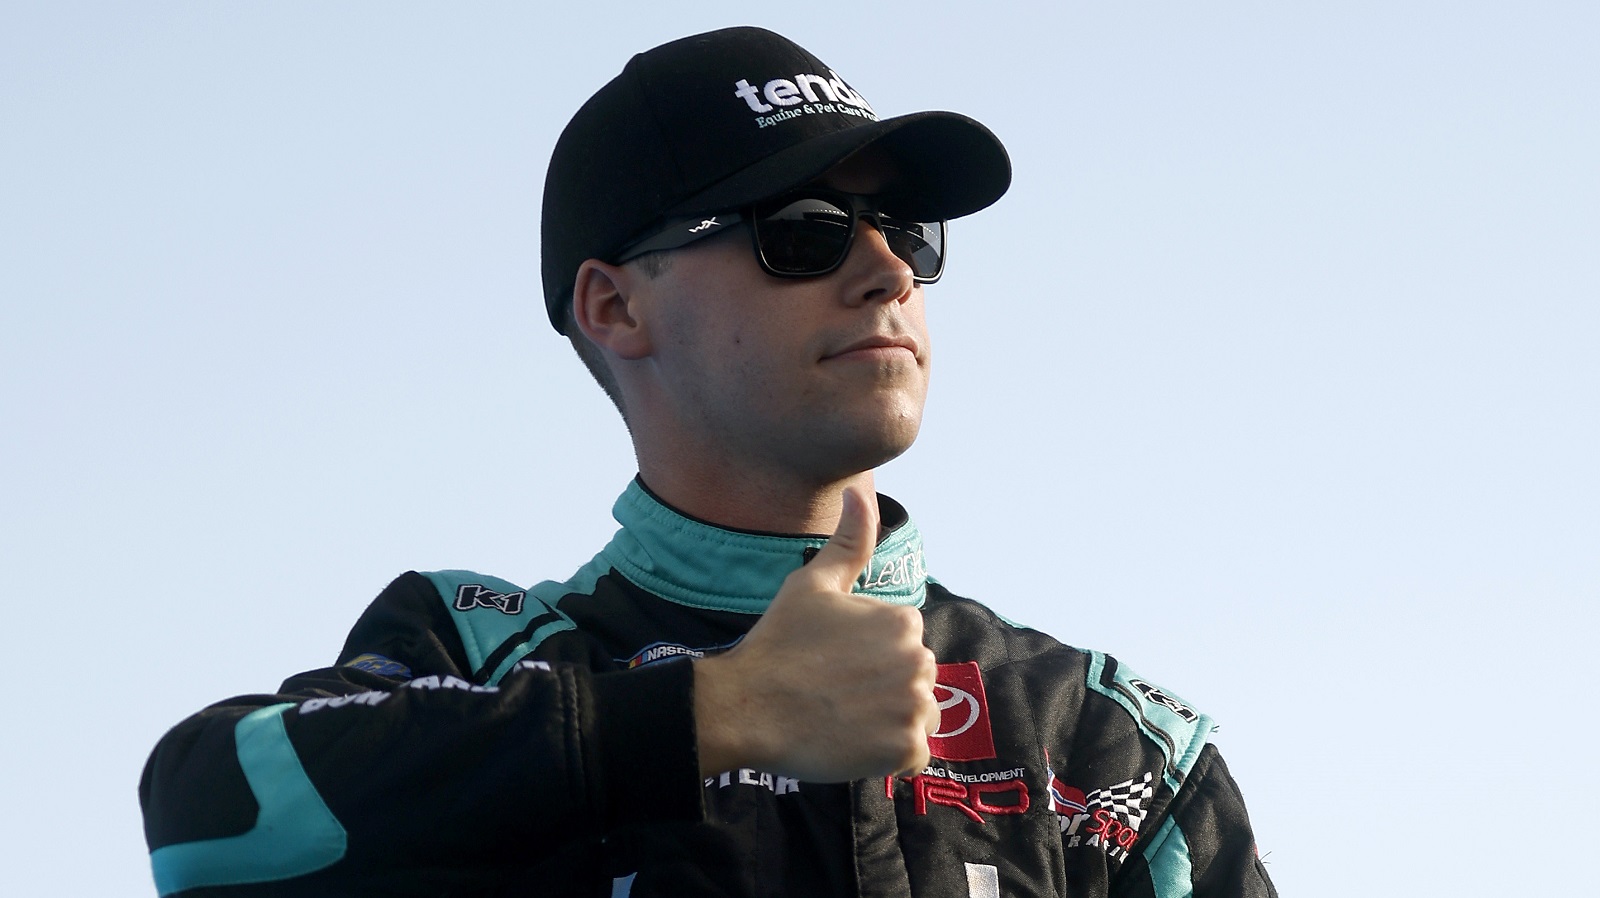 Ben Rhodes, driver of the No. 99 Toyota, gives a thumbs-up to fans as he walks onstage during driver intros prior to the NASCAR Camping World Truck Series Heart of America 200 at Kansas Speedway on May 14, 2022. | Chris Graythen/Getty Images